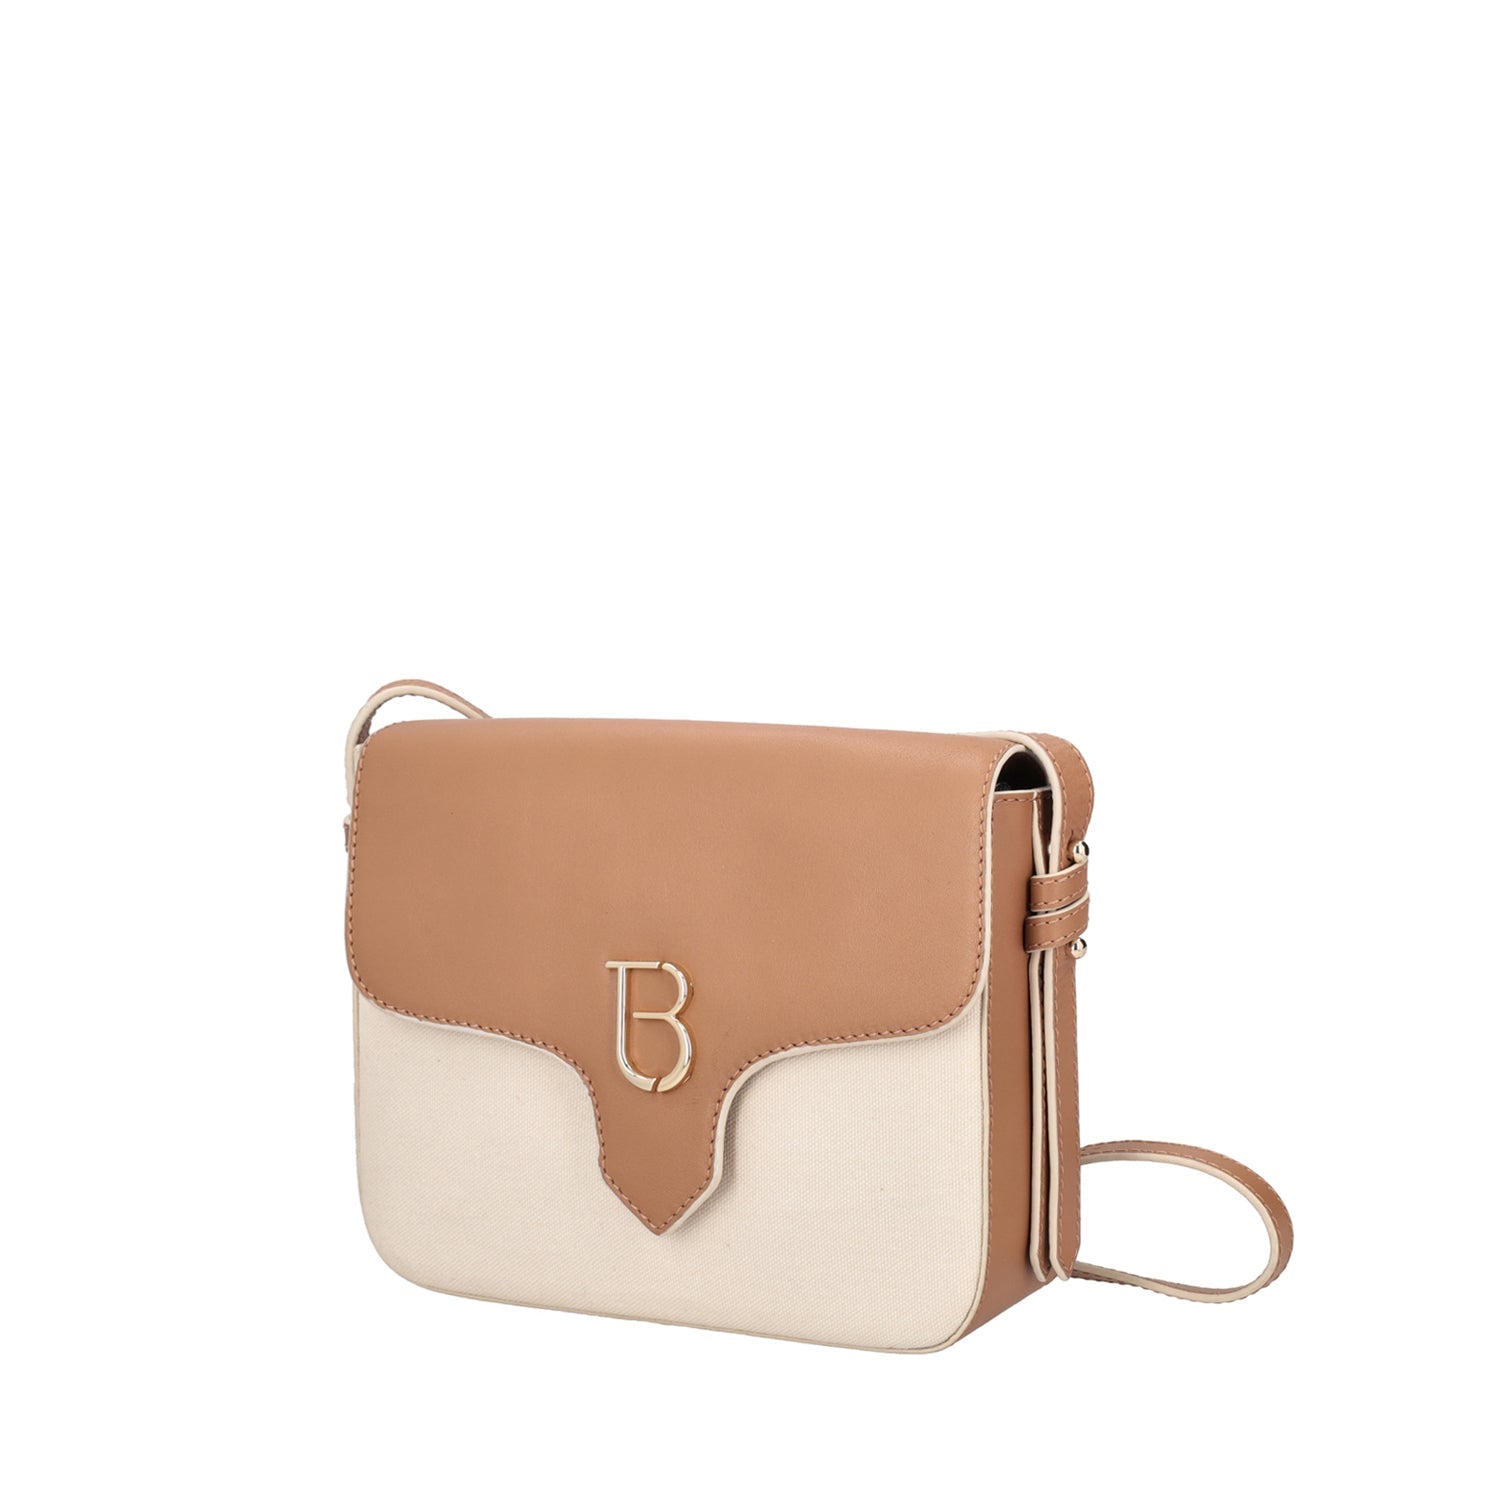 TAN FRESIA CROSSBODY BAG IN LEATHER AND CANVAS